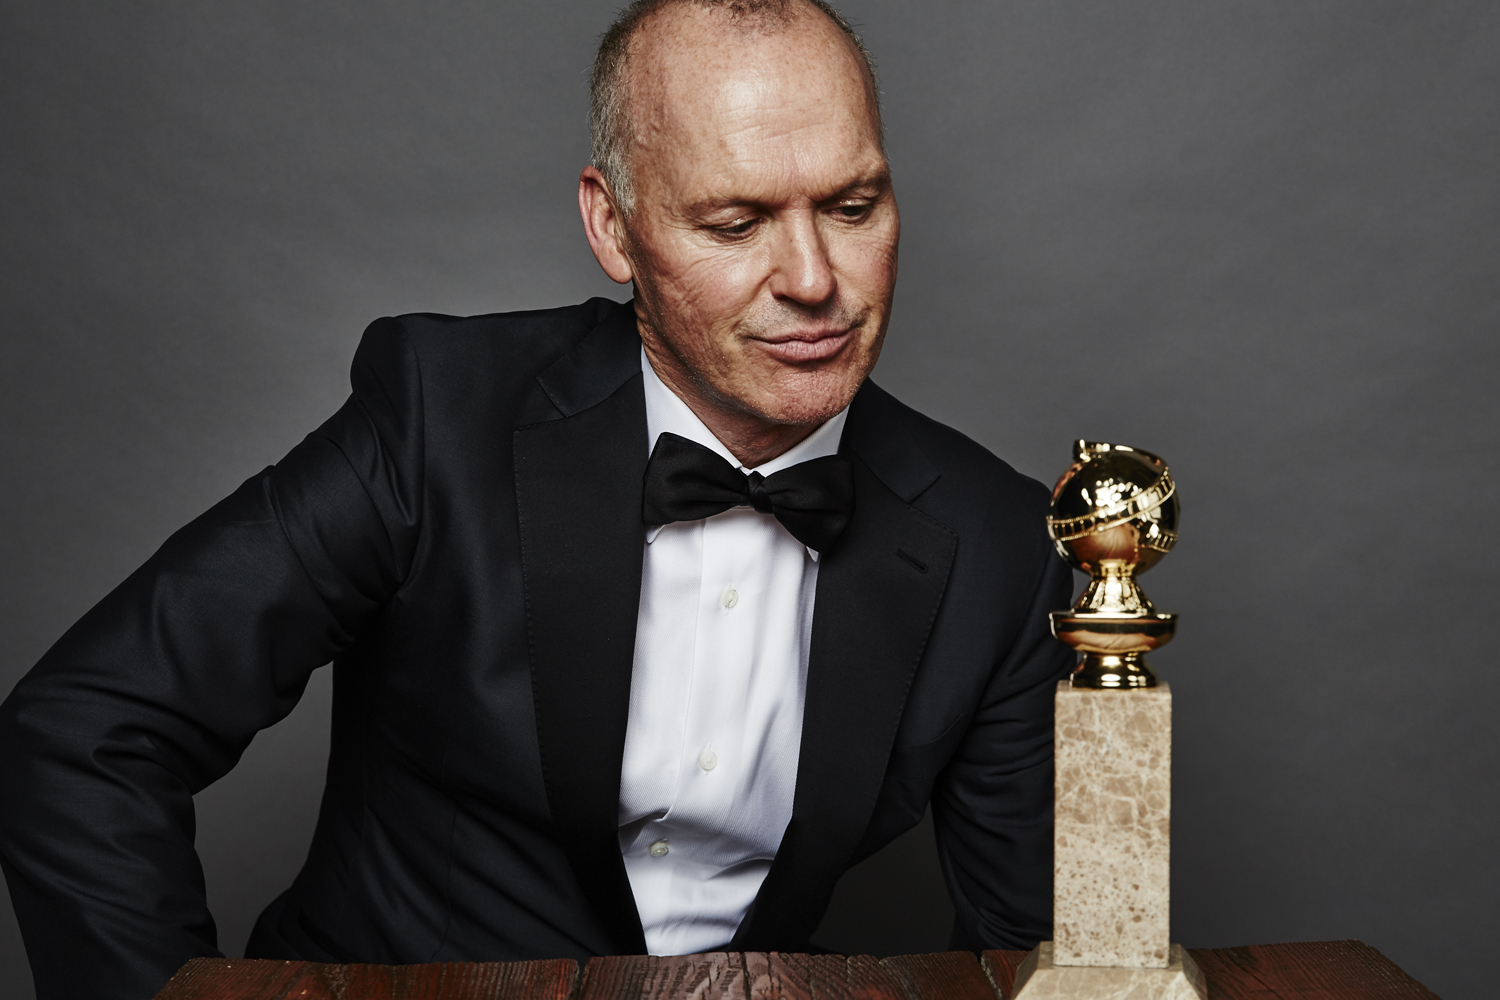 Michael Keaton poses for a portrait during the 72nd Annual Golden Globe Awards on Jan. 11, 2015, in Beverly Hills, Calif. (Maarten de Boer—Getty Images)